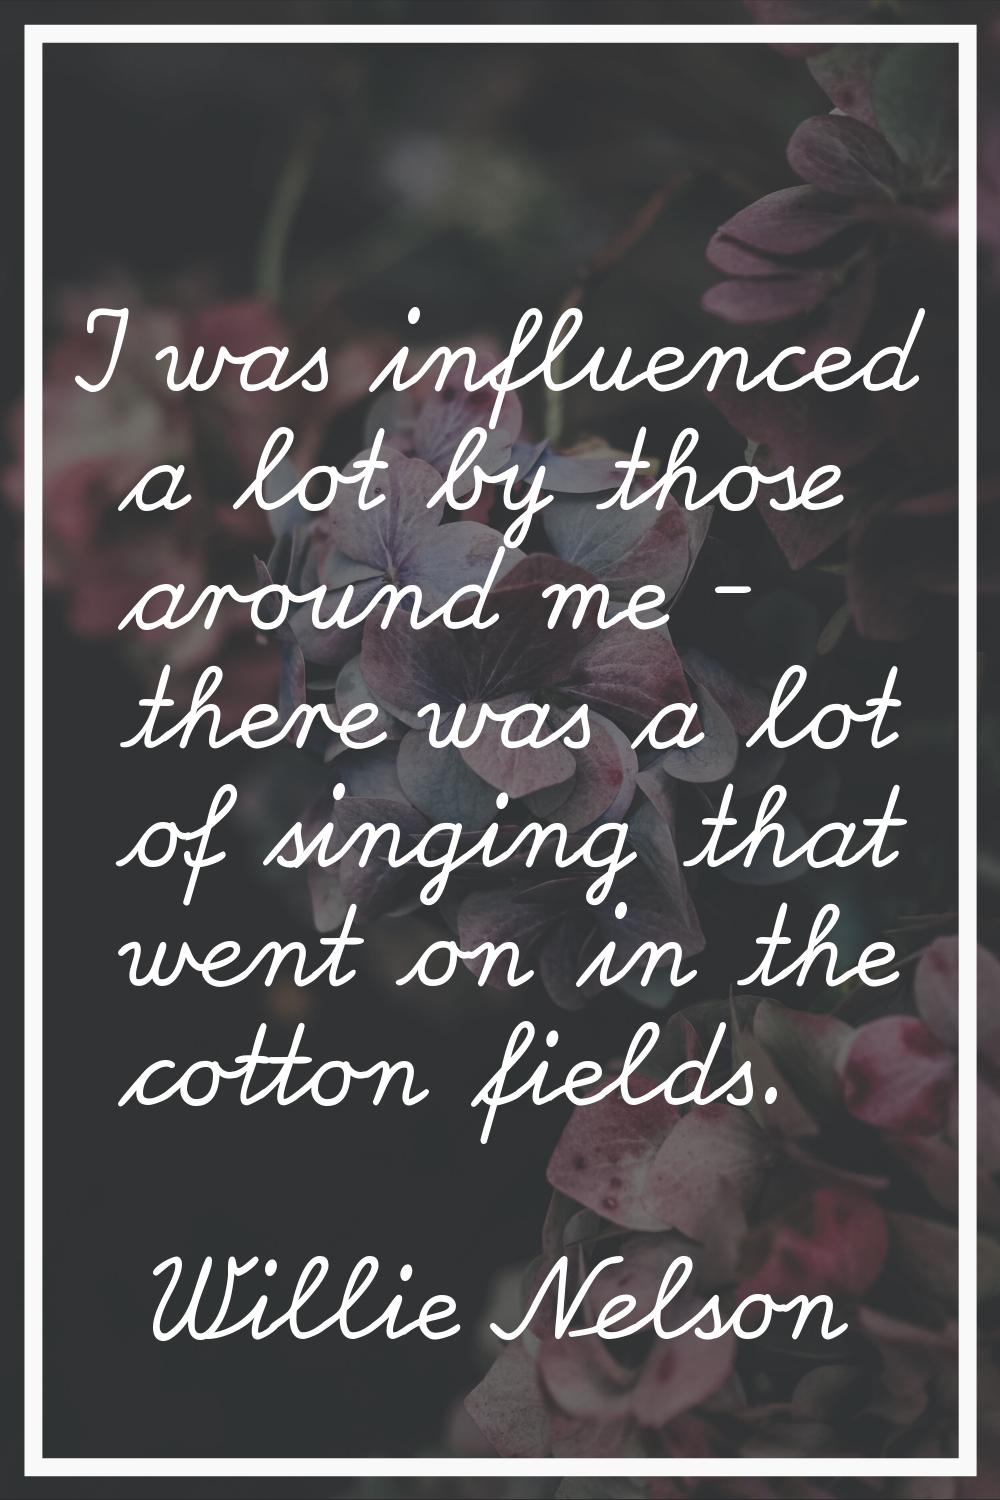 I was influenced a lot by those around me - there was a lot of singing that went on in the cotton f